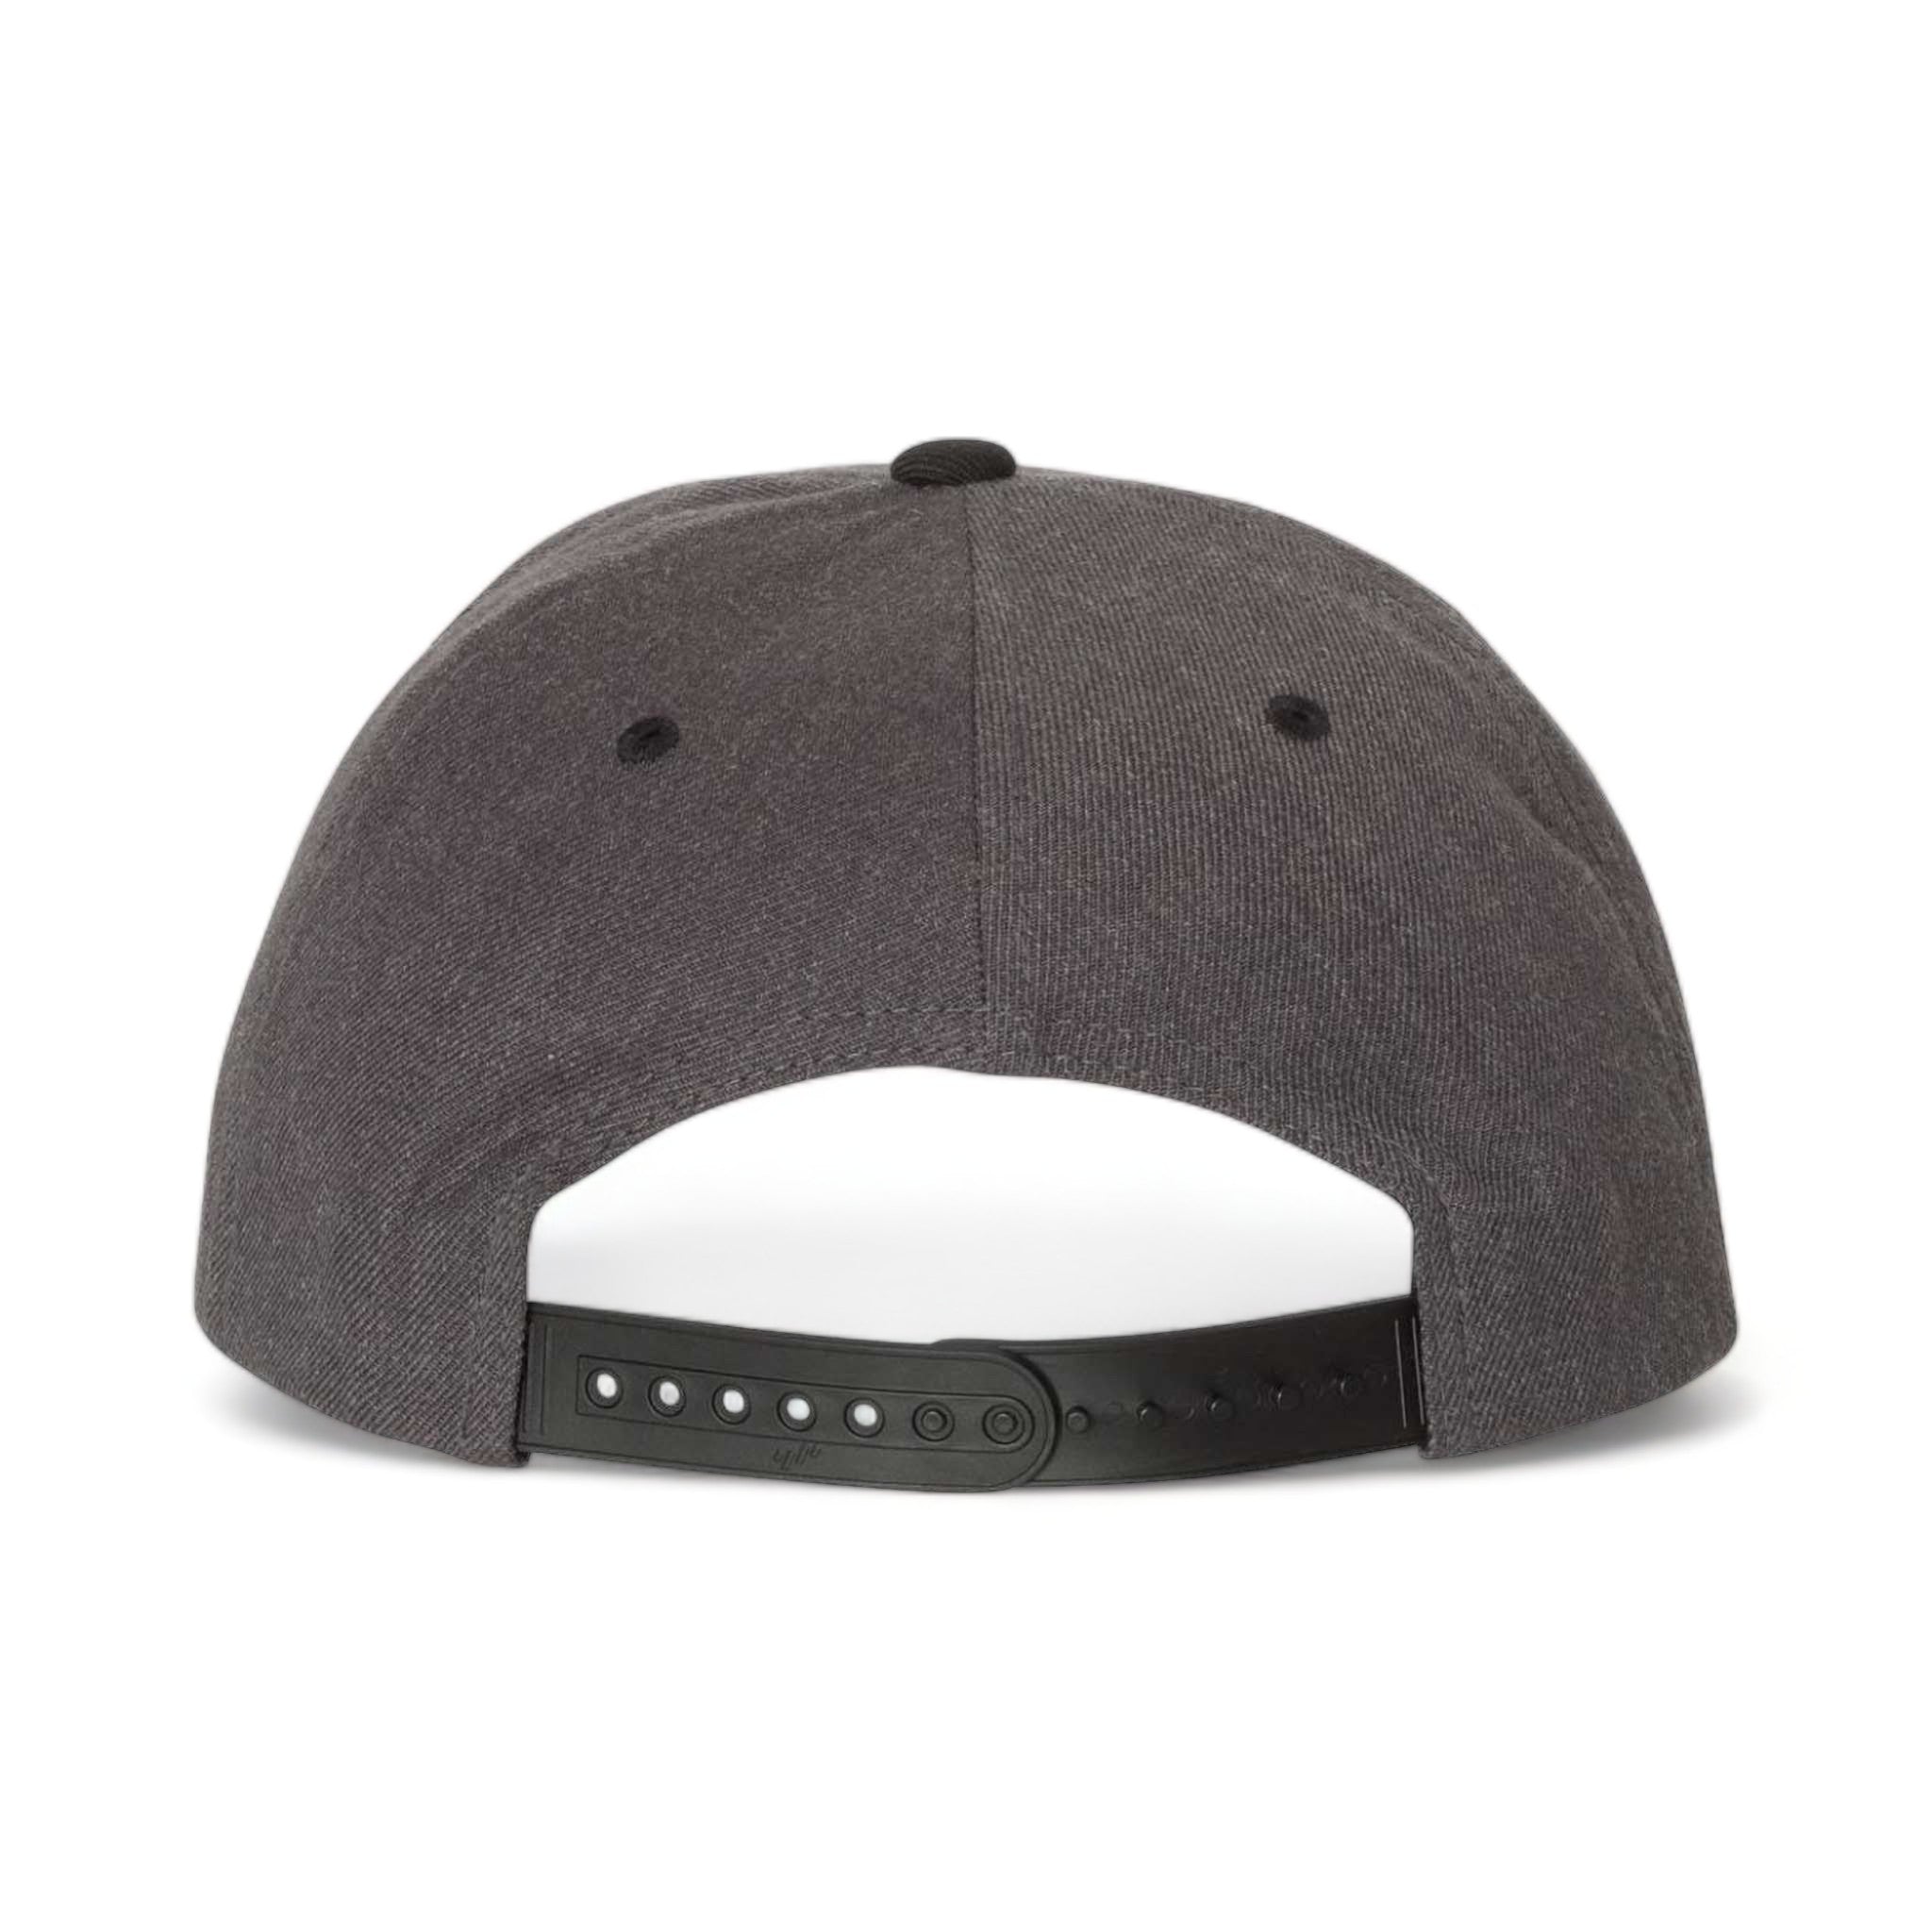 Back view of YP Classics 6089M custom hat in dark heather and black